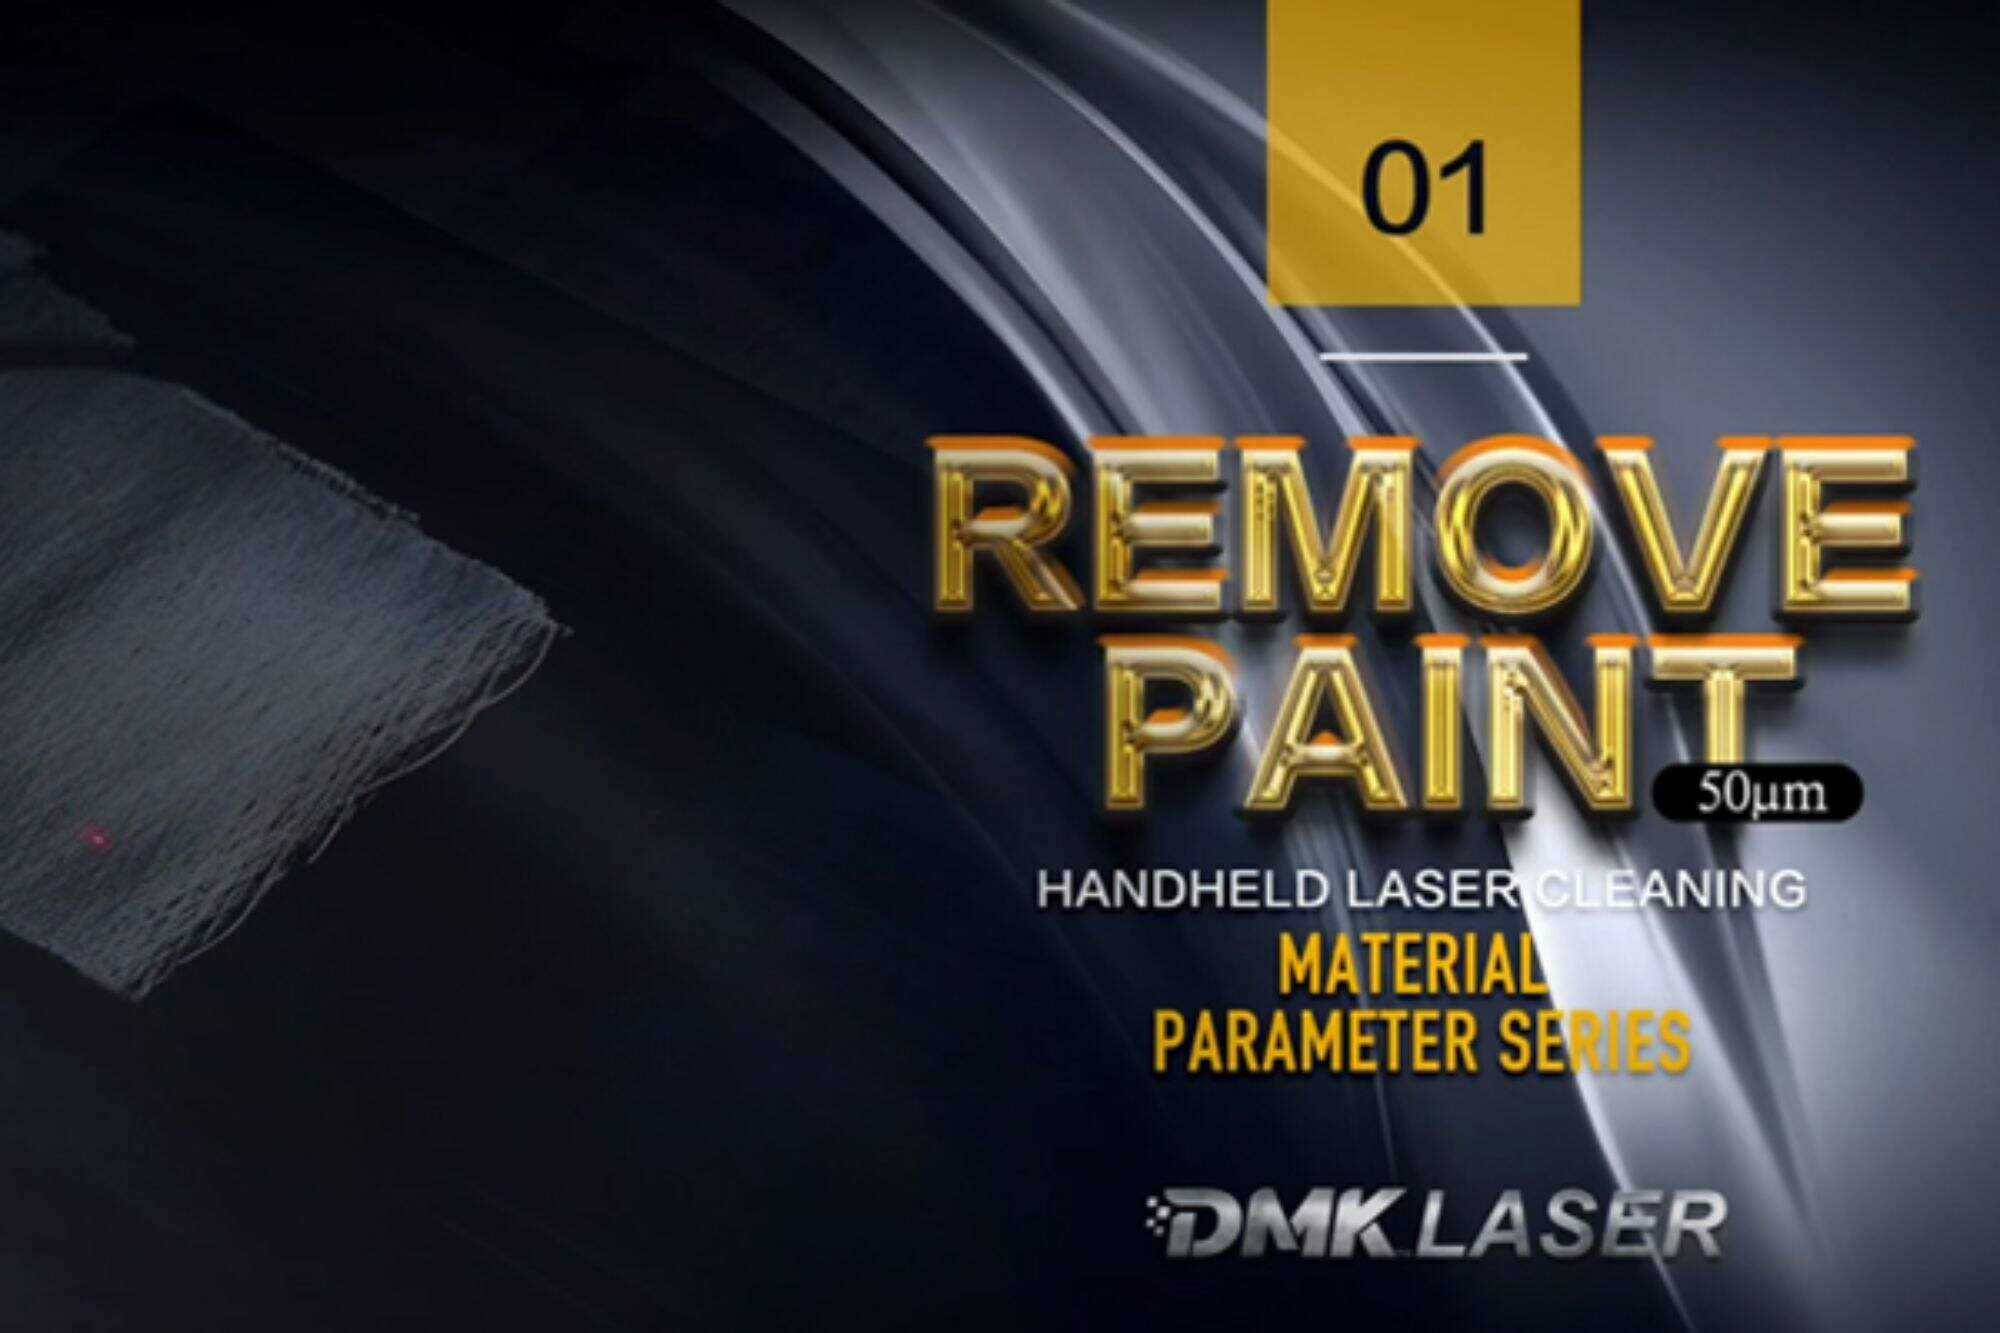 DMK Pulse laser cleaning machine is effective in cleaning paint